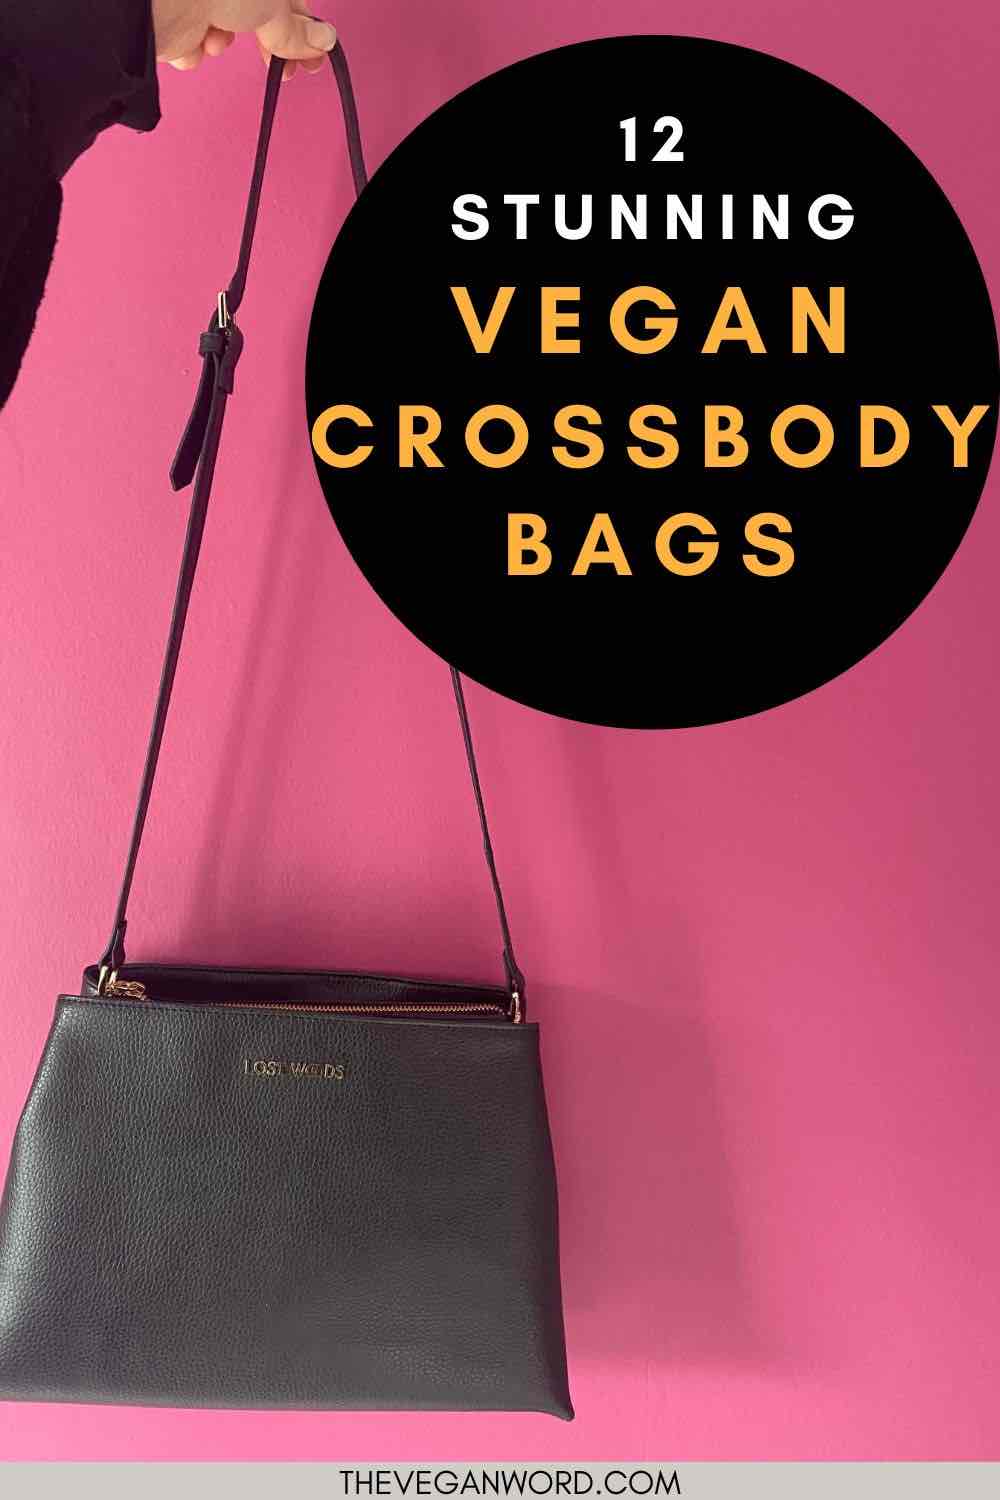 Pinterest image showing a black vegan crossbody bag against a pink background with text that reads "12 stunning vegan crossbody bags"